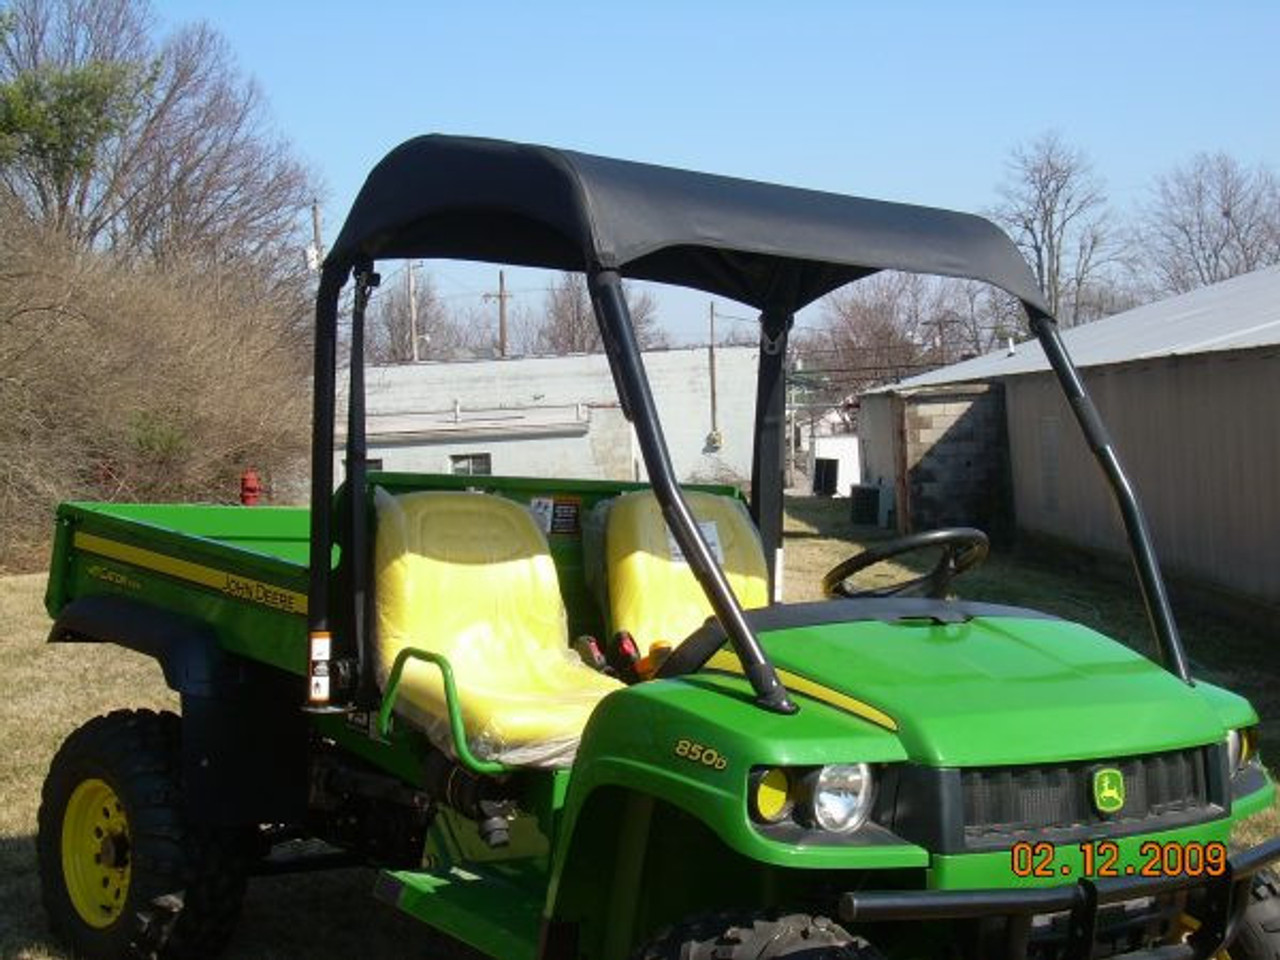 3 Star side x side John Deere HPX/XUV soft top front and side angle view close up